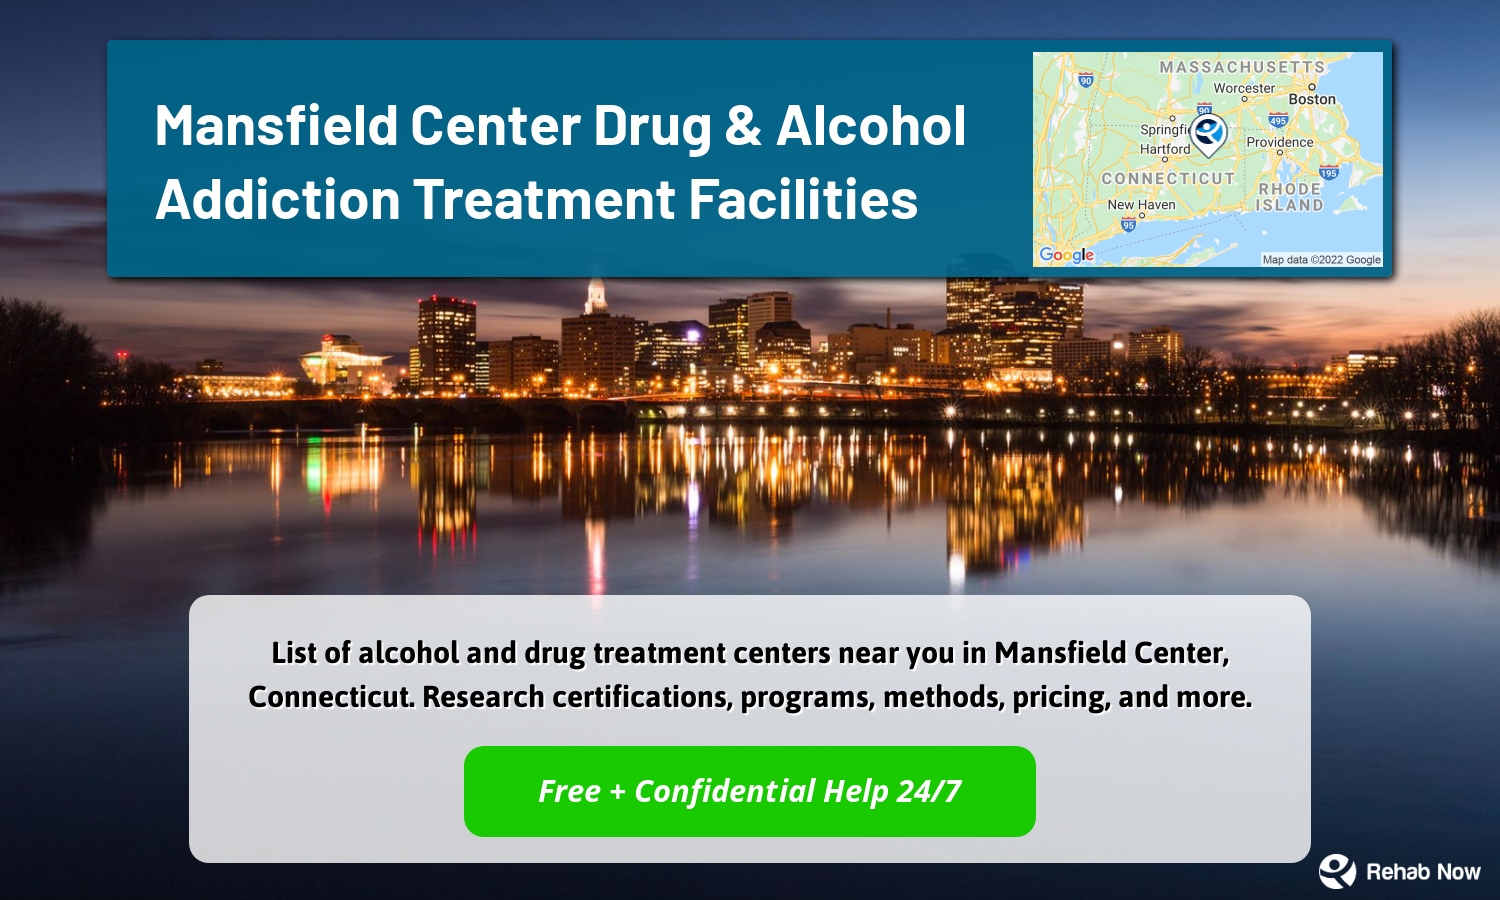 List of alcohol and drug treatment centers near you in Mansfield Center, Connecticut. Research certifications, programs, methods, pricing, and more.